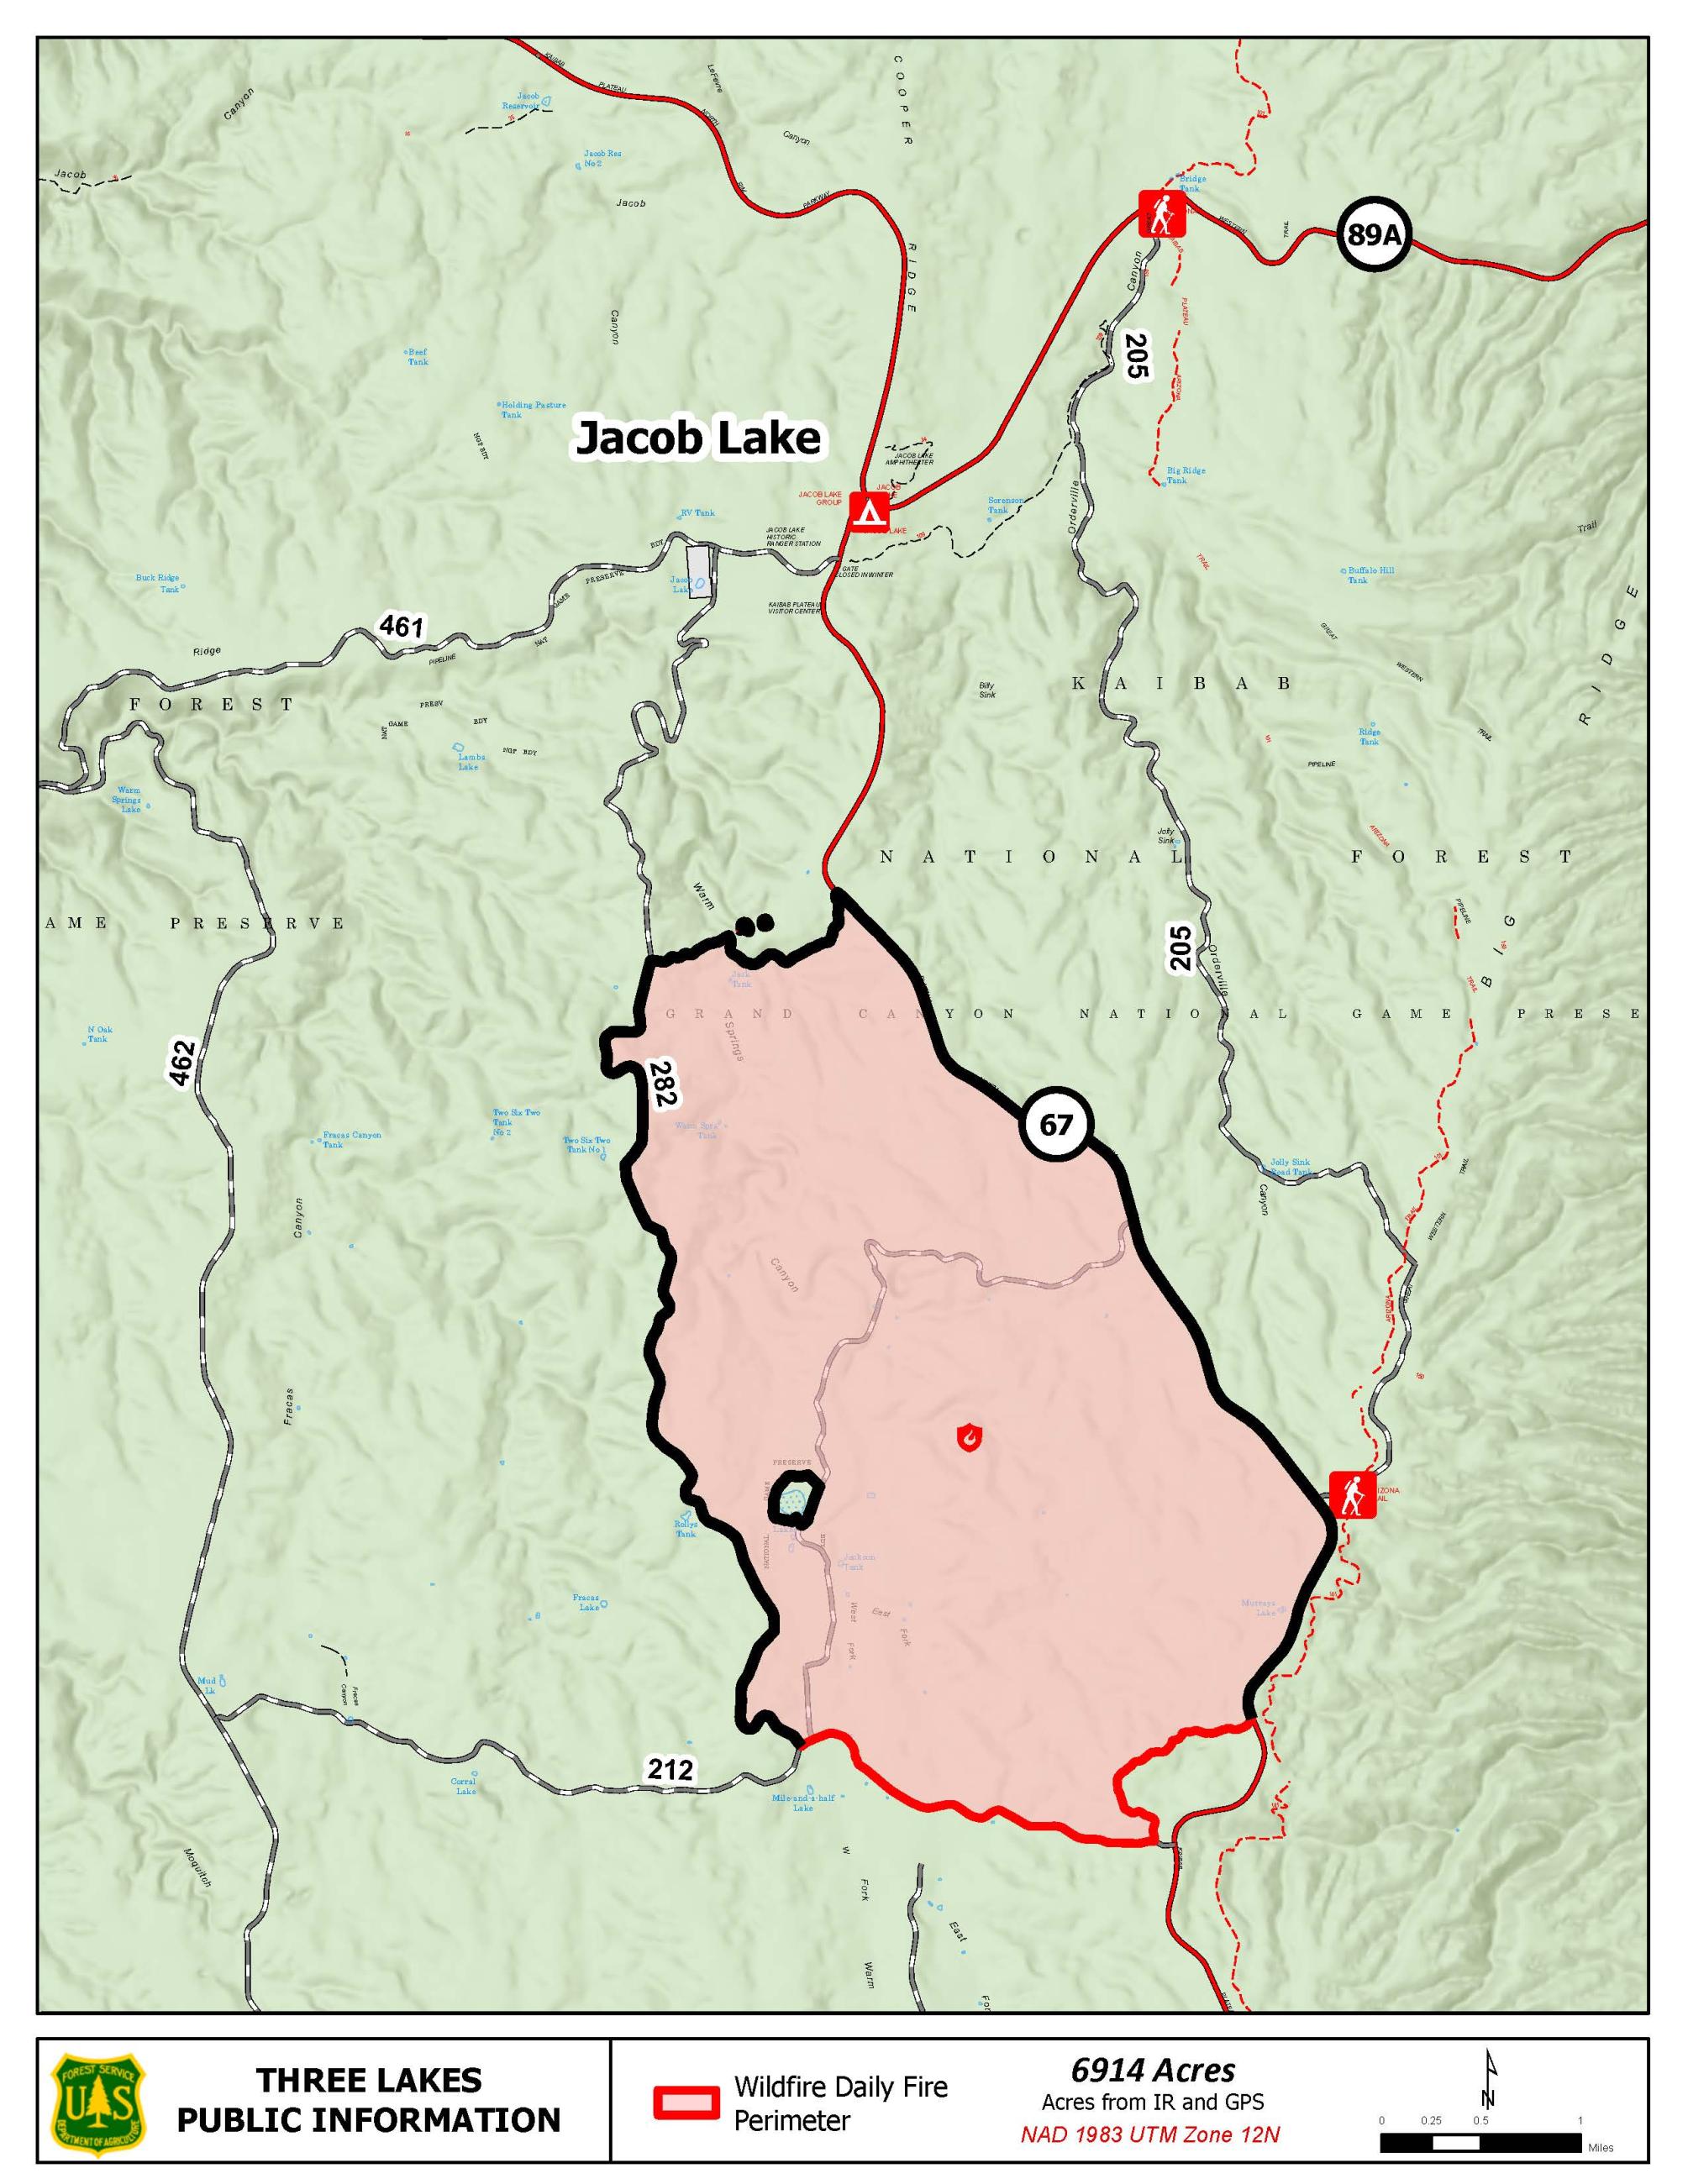 Map of the Three Lakes Fire area on 7/16.